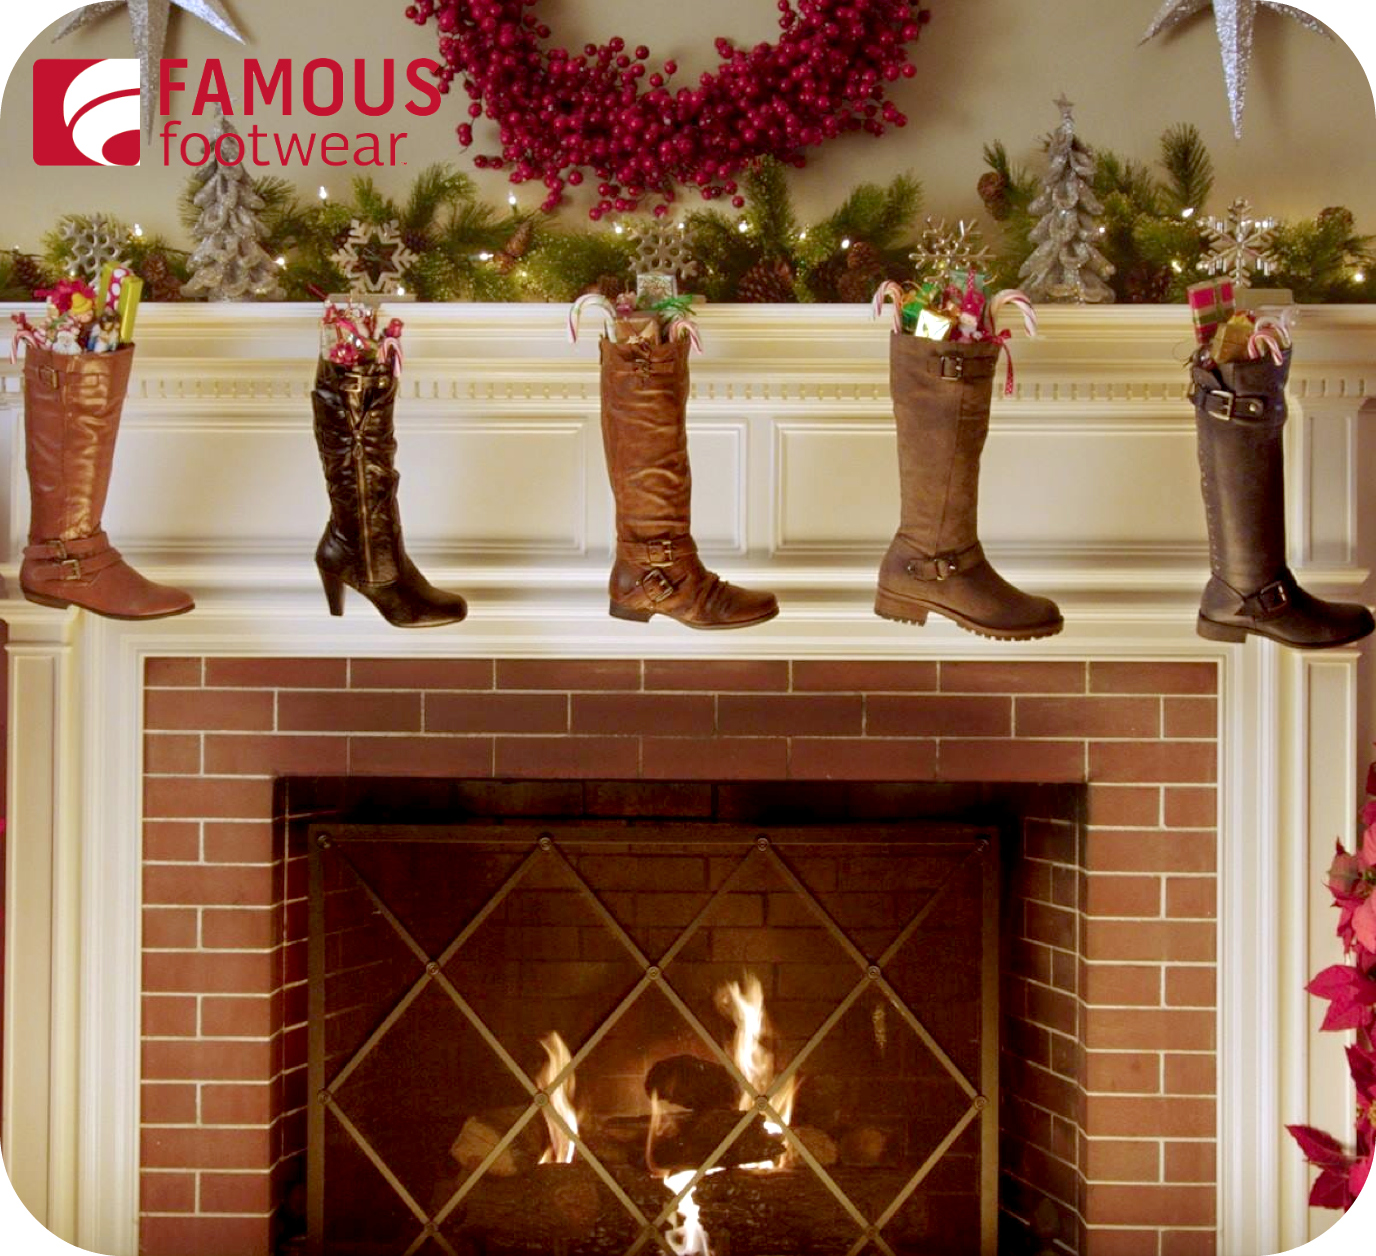 Famous Footwear: Save 15% Off Entire Purchase (Including Clearance